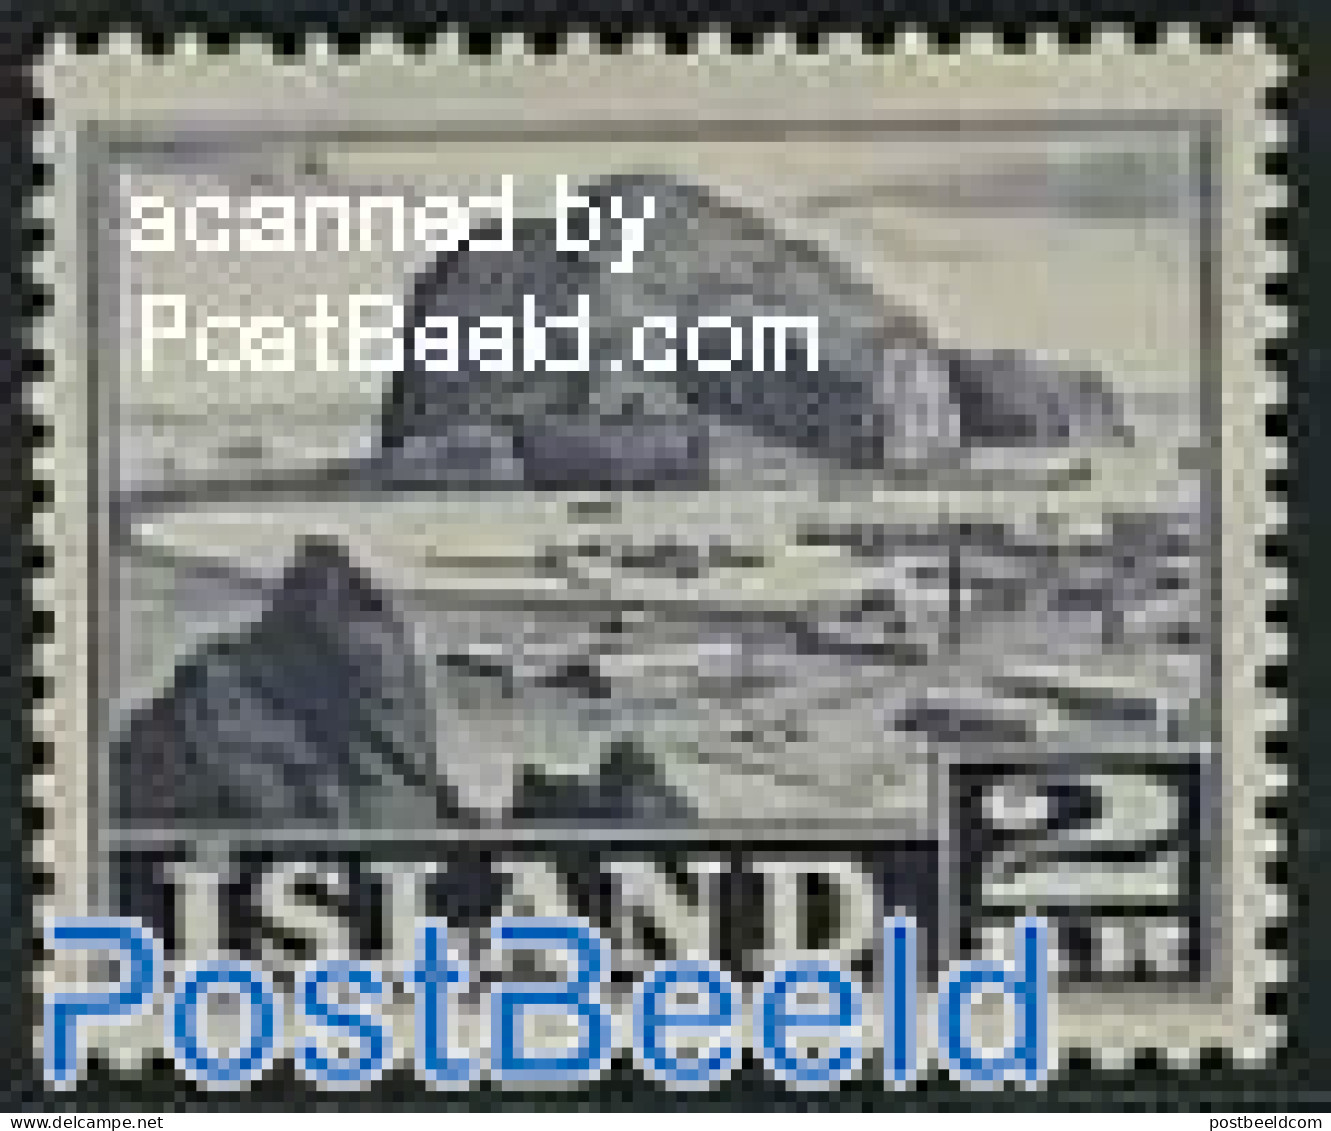 Iceland 1950 2Kr, Stamp Out Of Set, Unused (hinged), Various - Lighthouses & Safety At Sea - Nuevos